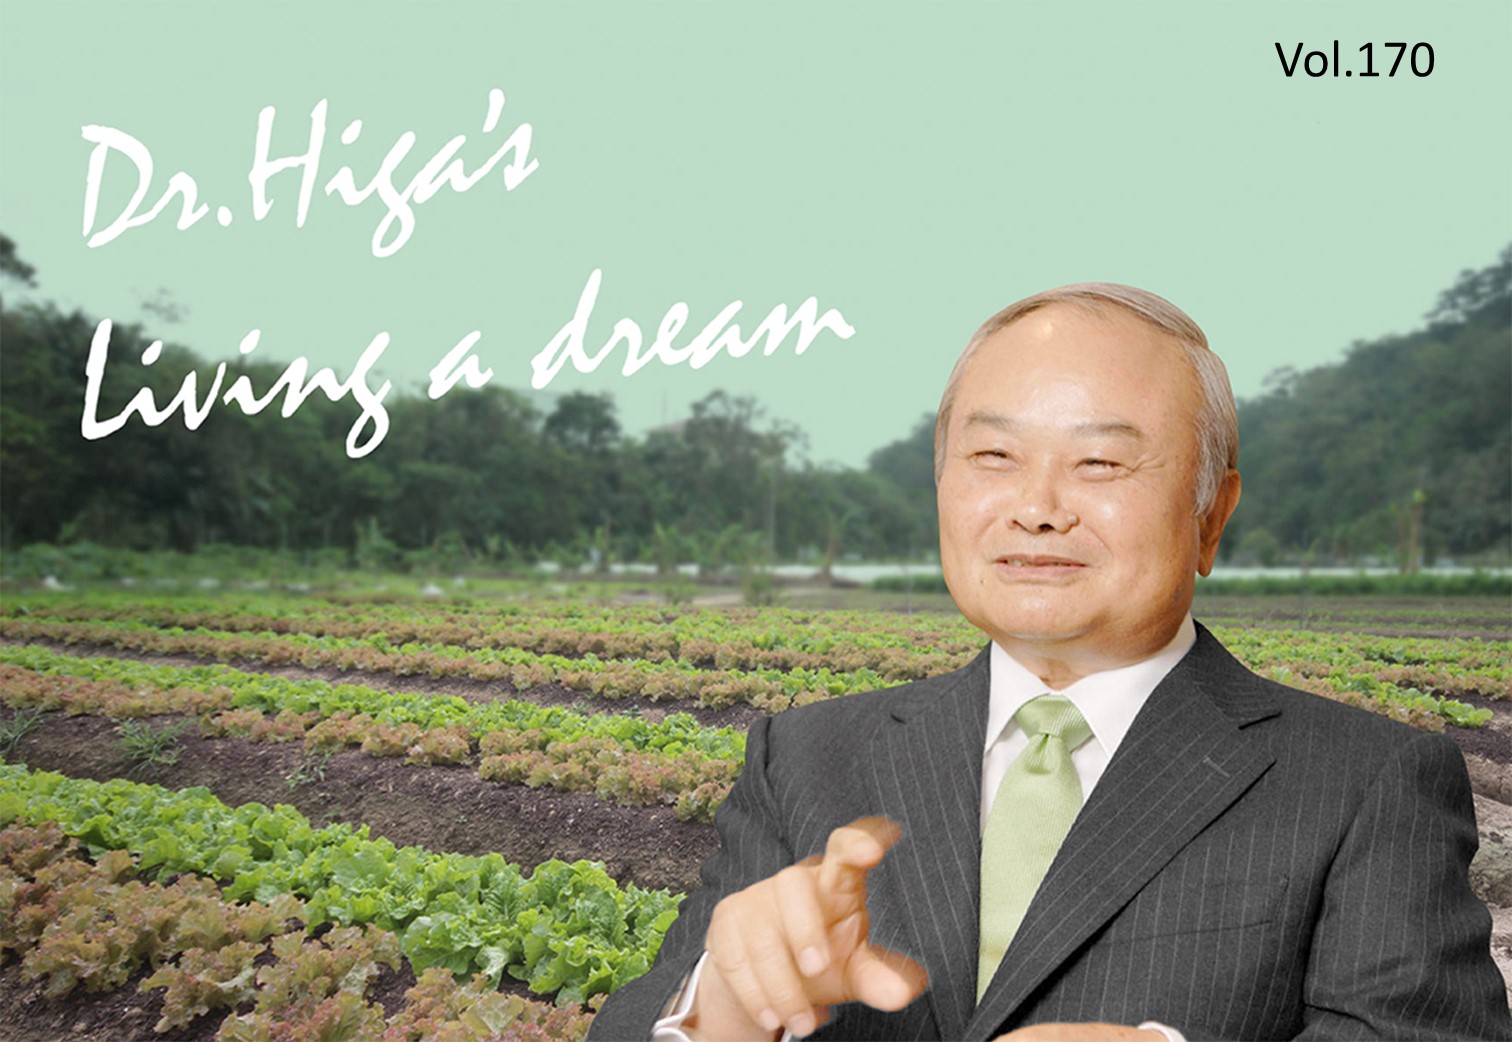 Dr. Higa's "Living a Dream": the latest article #170 is up!!!